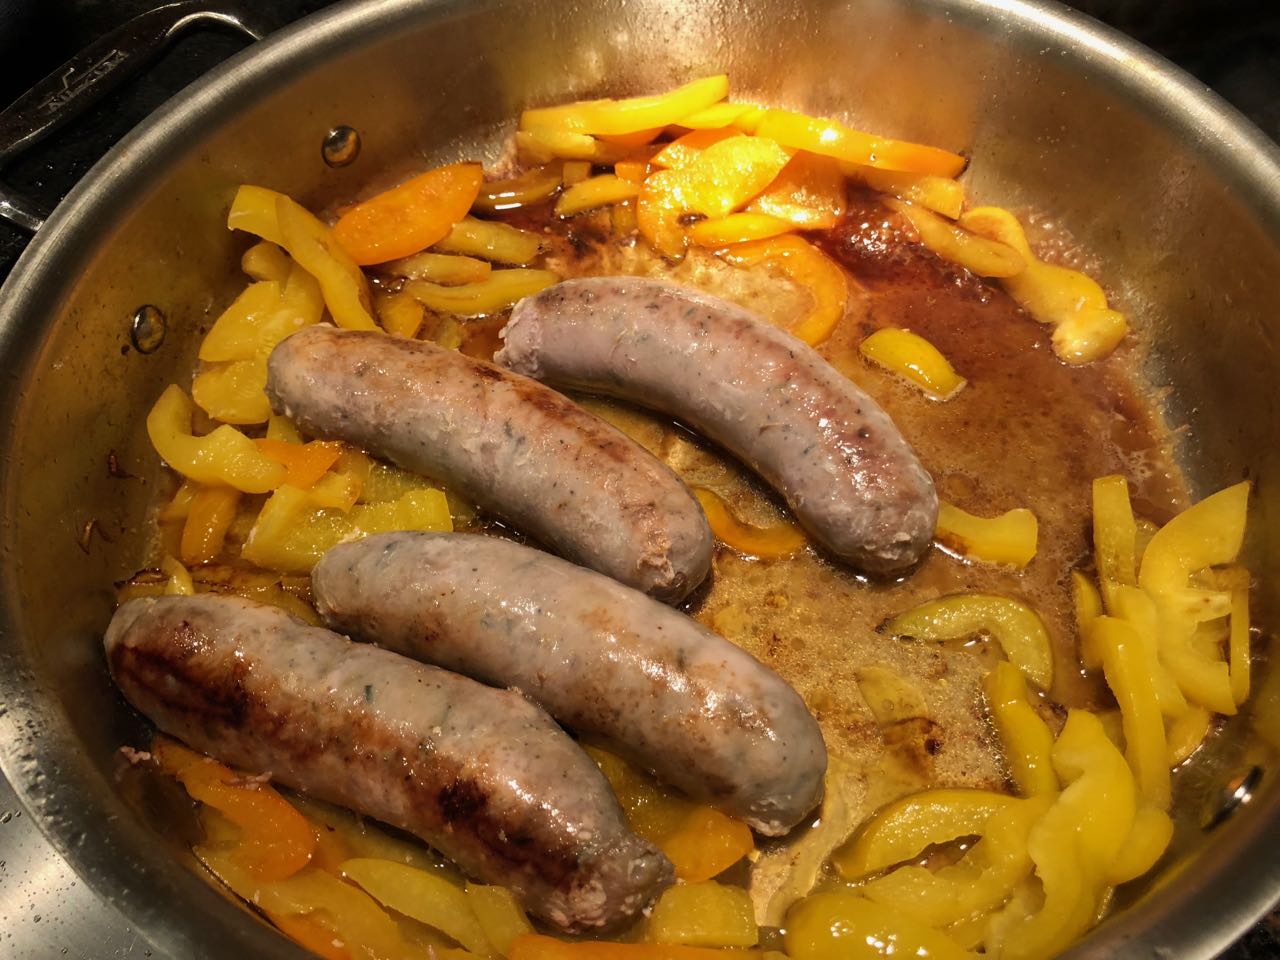 cooking down the sausage and peppers